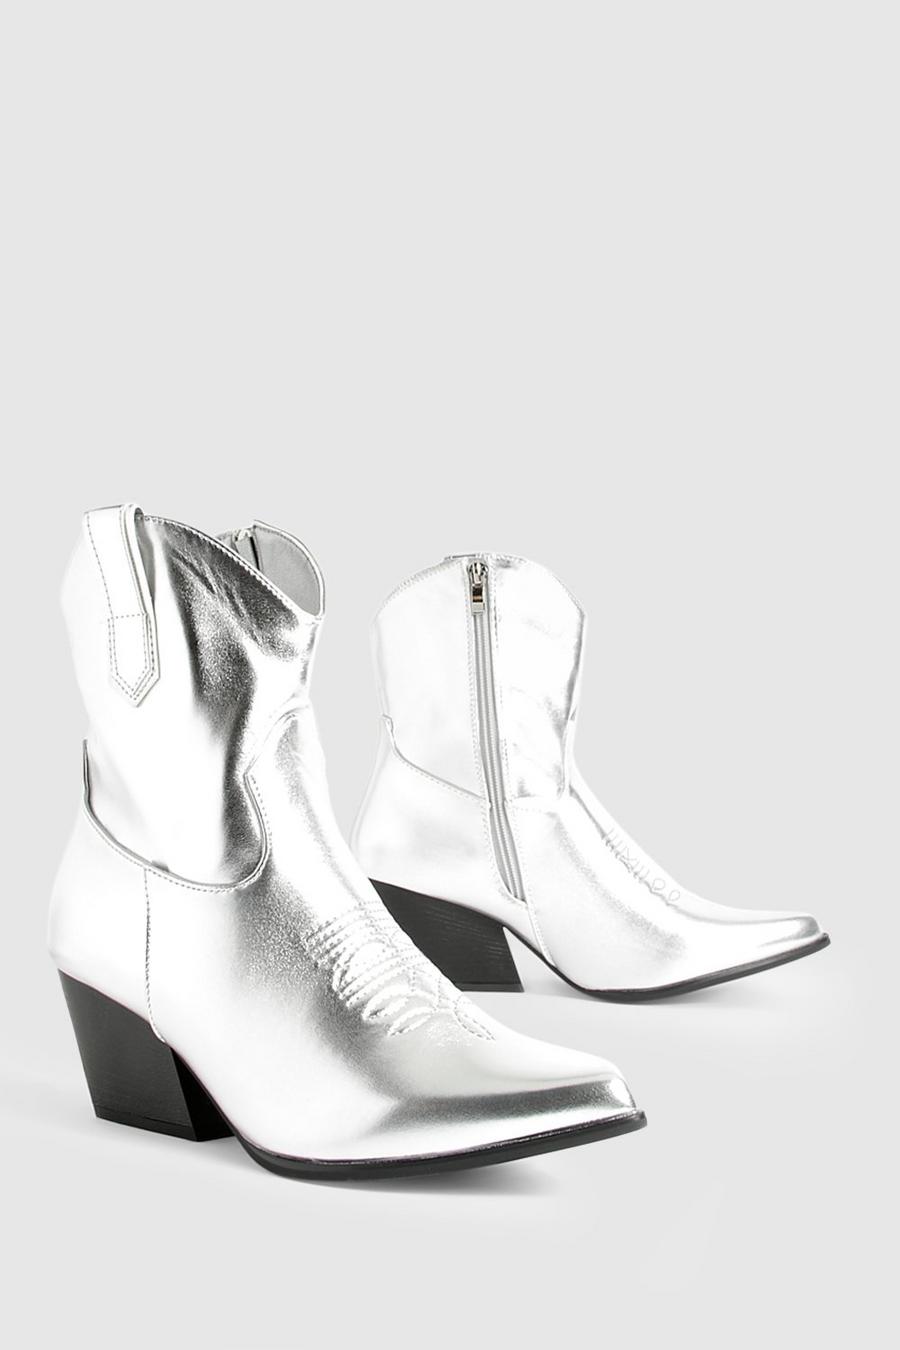 Silver Metallic Ankle Western Cowboy Boots